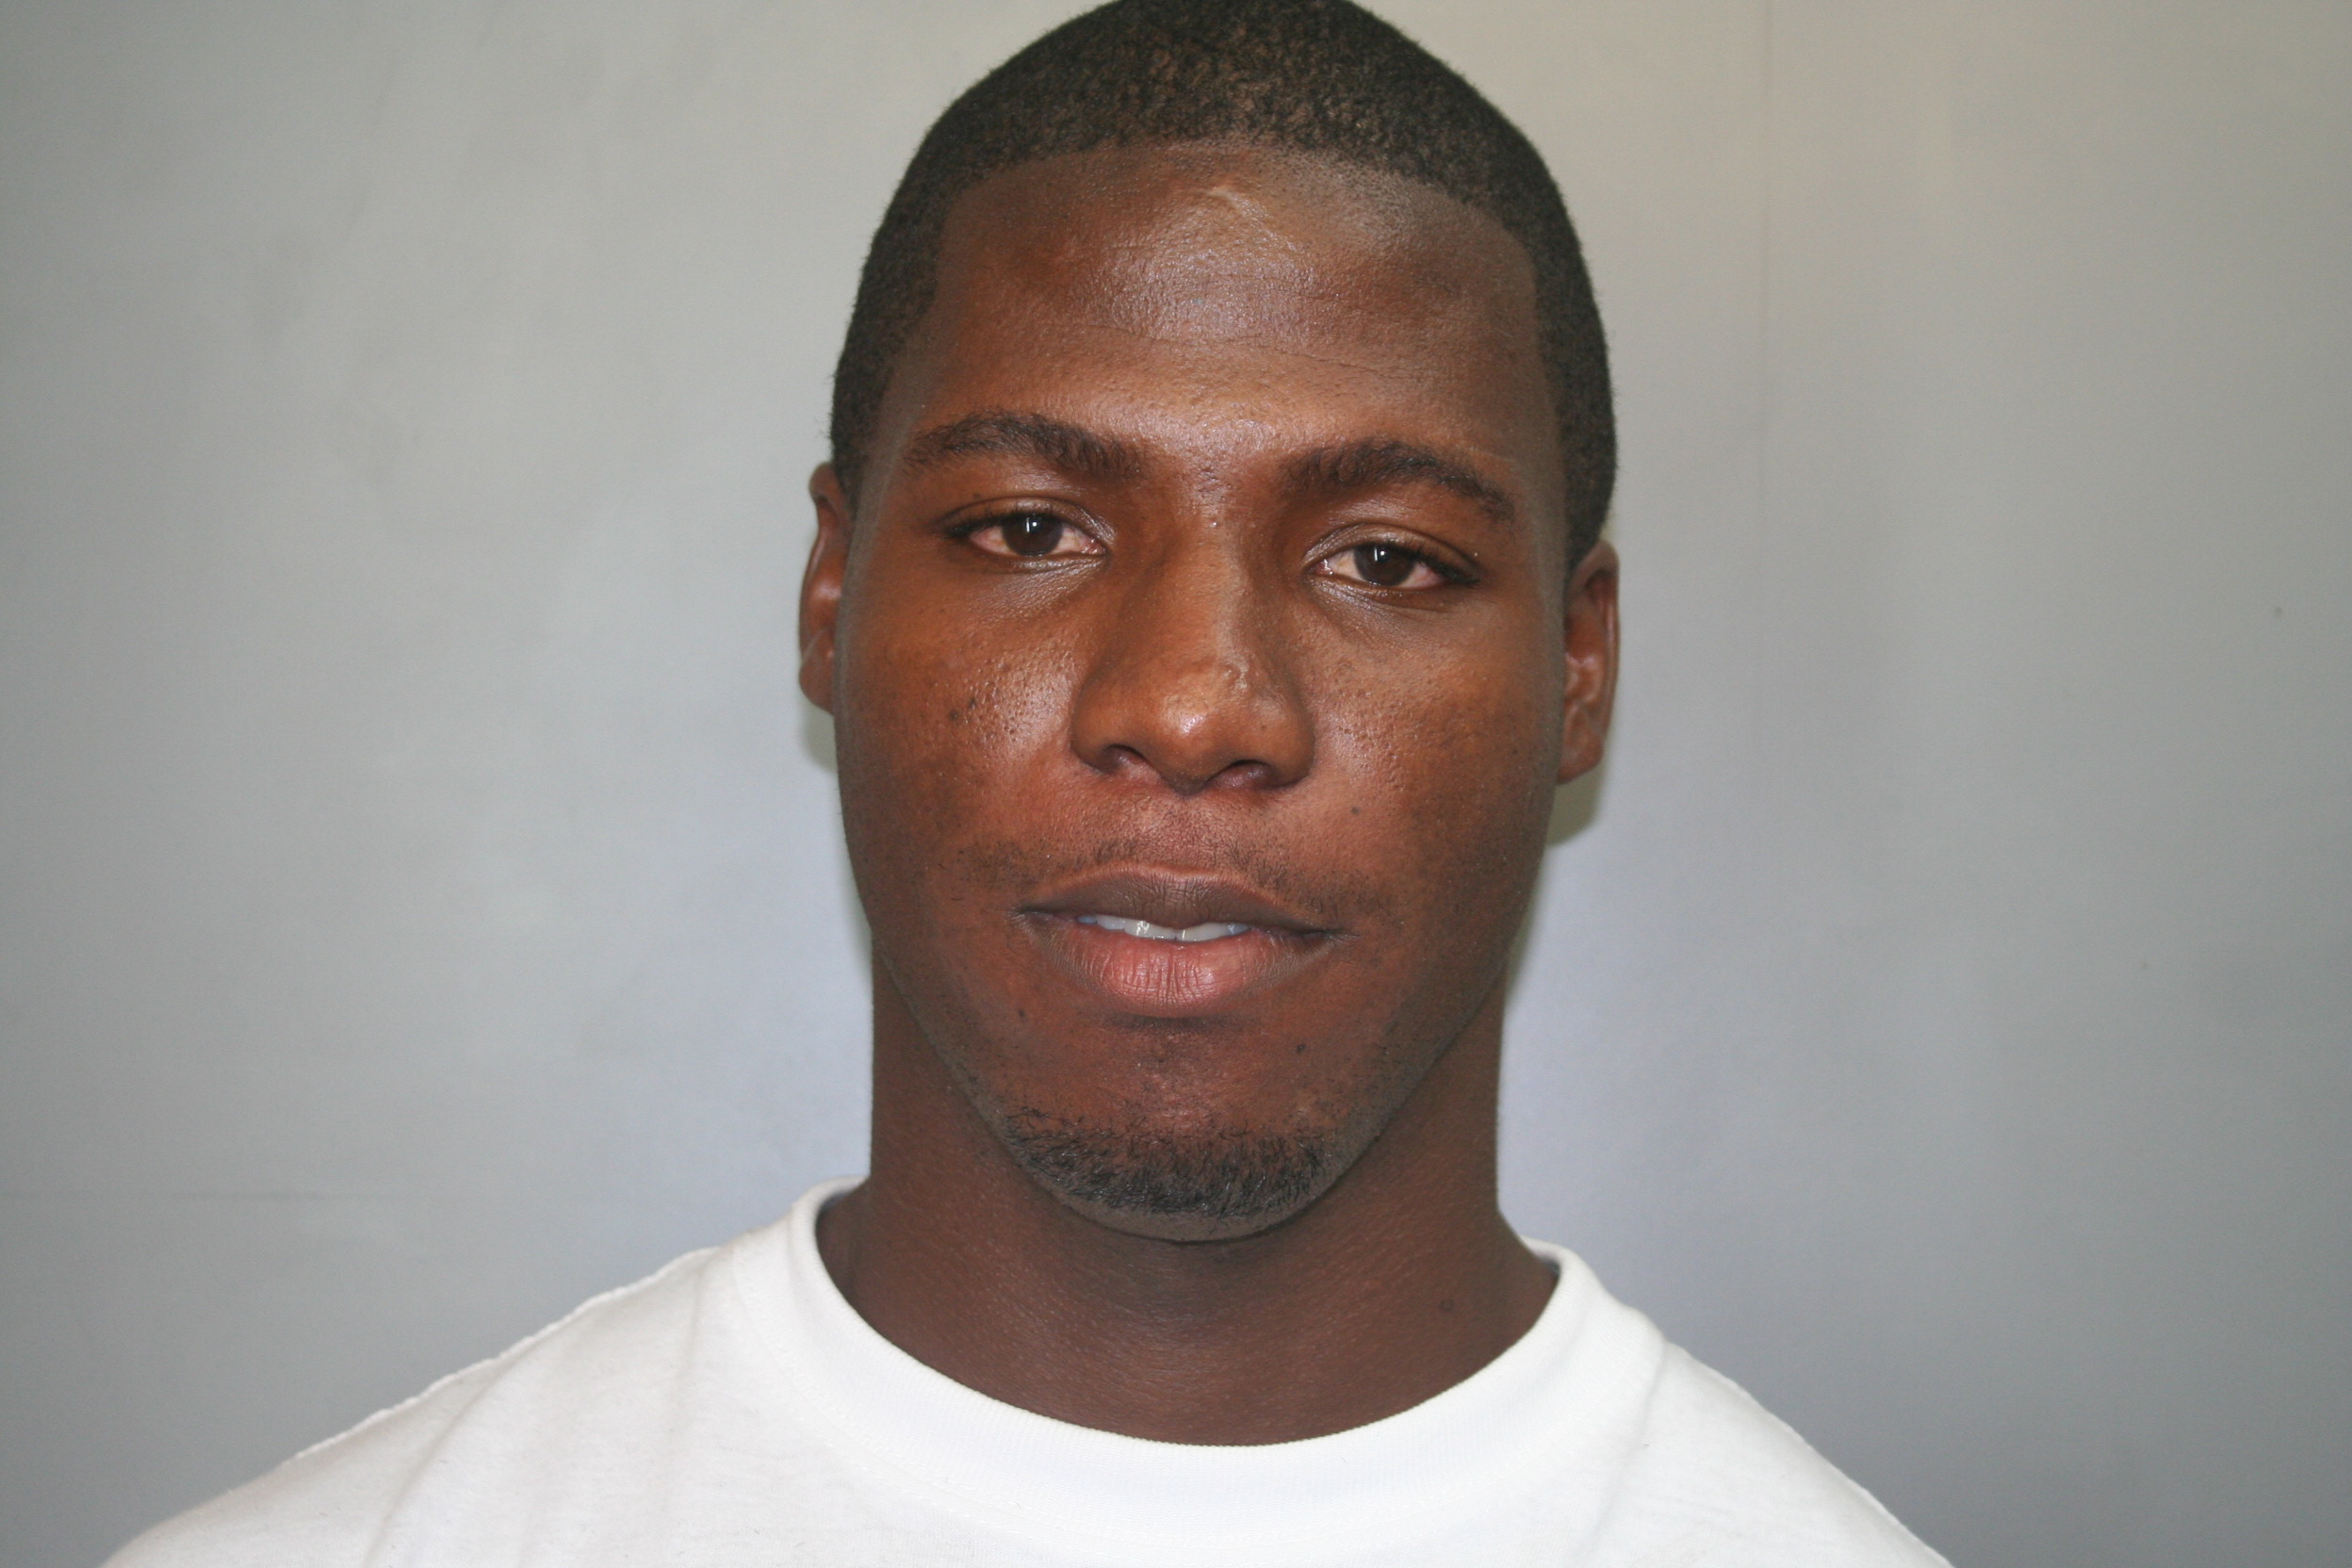 Eric McBean, age 28, was one of four men arrested Tuesday night after gunshots were reported near Larsen Elementary.